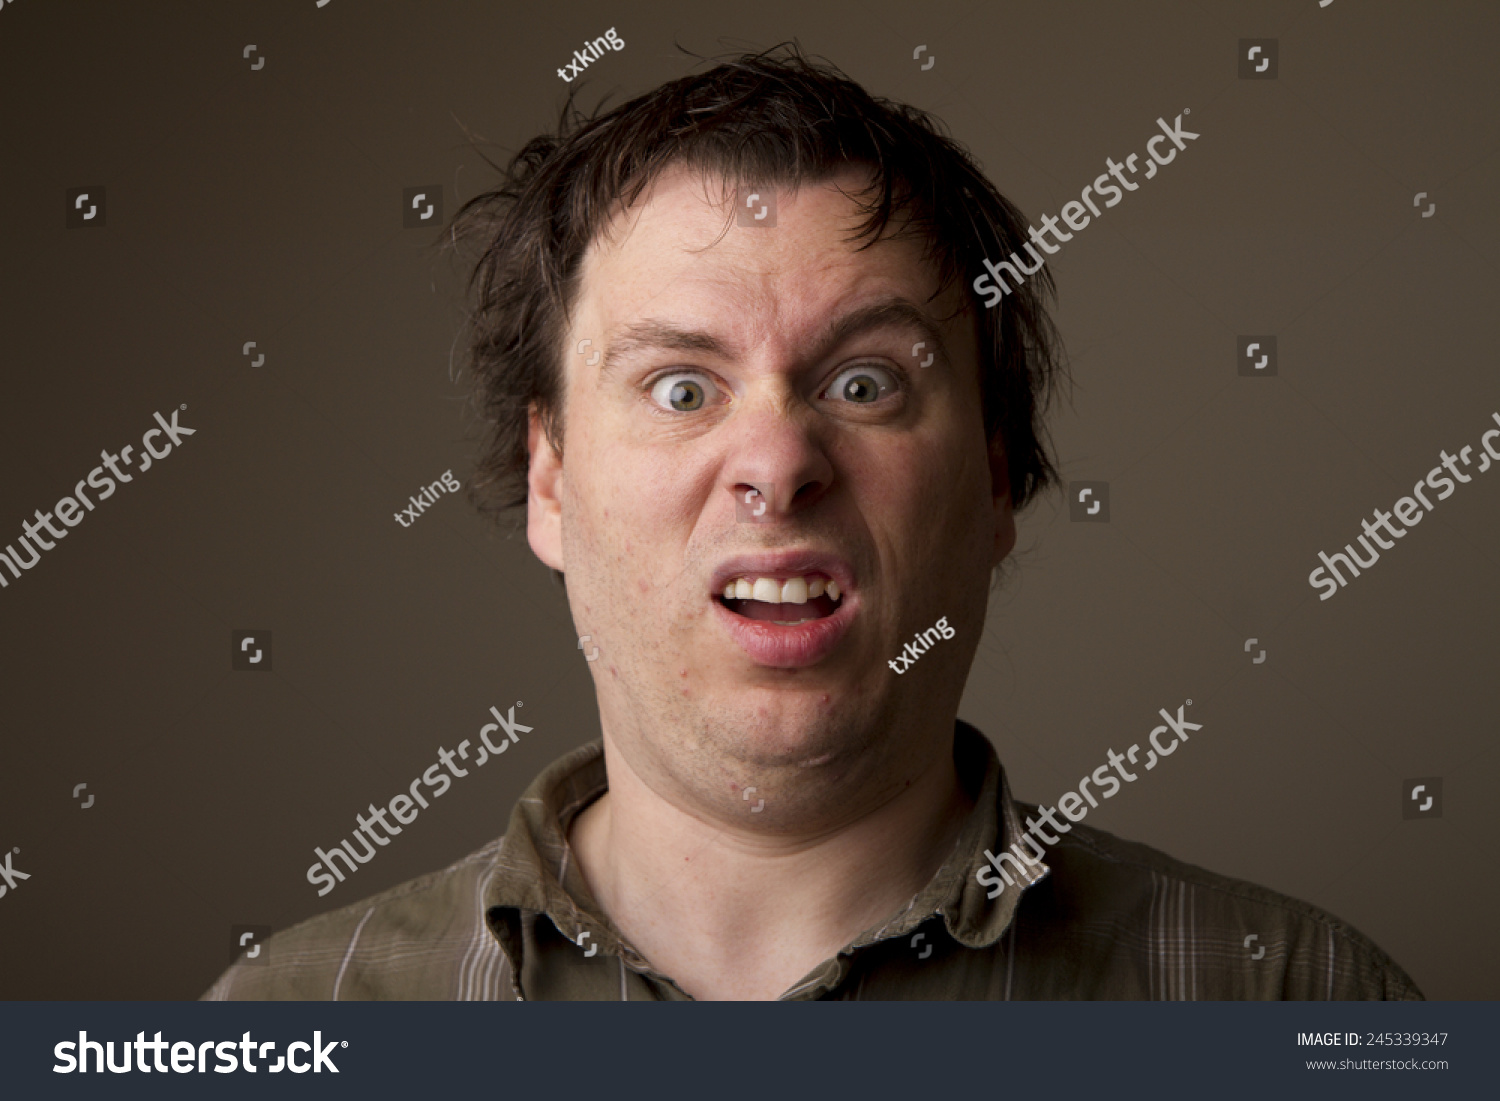 Man Shocked At What He See S Stock Photo Shutterstock